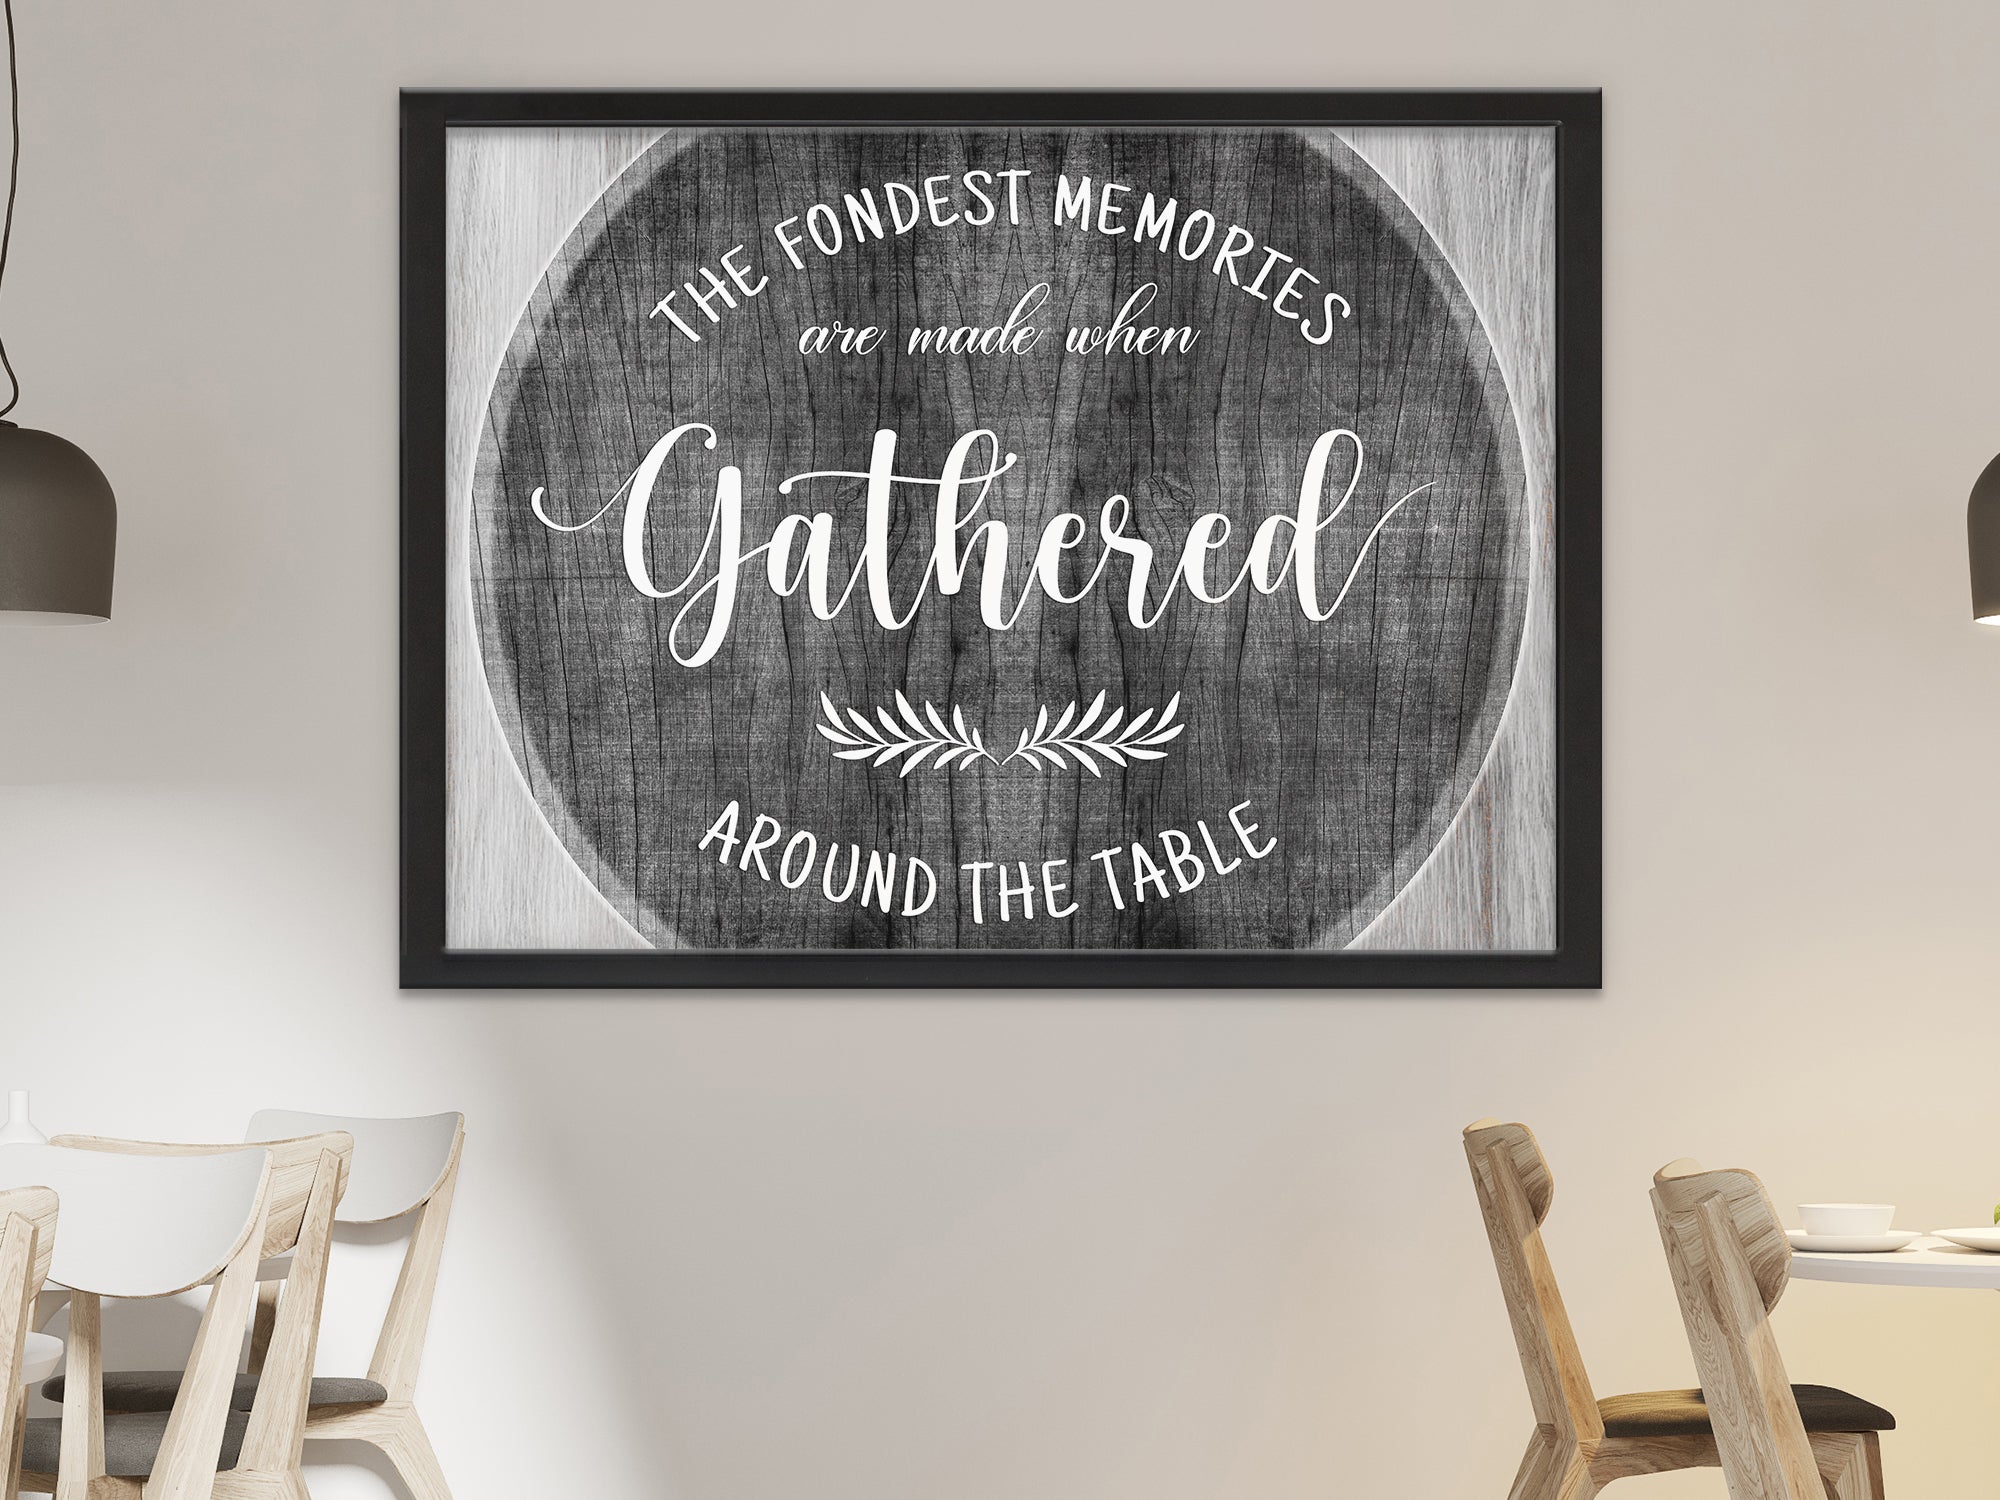 Fondest Memories Are Made When Gathered - Dinning Room - Canvas Wall Art